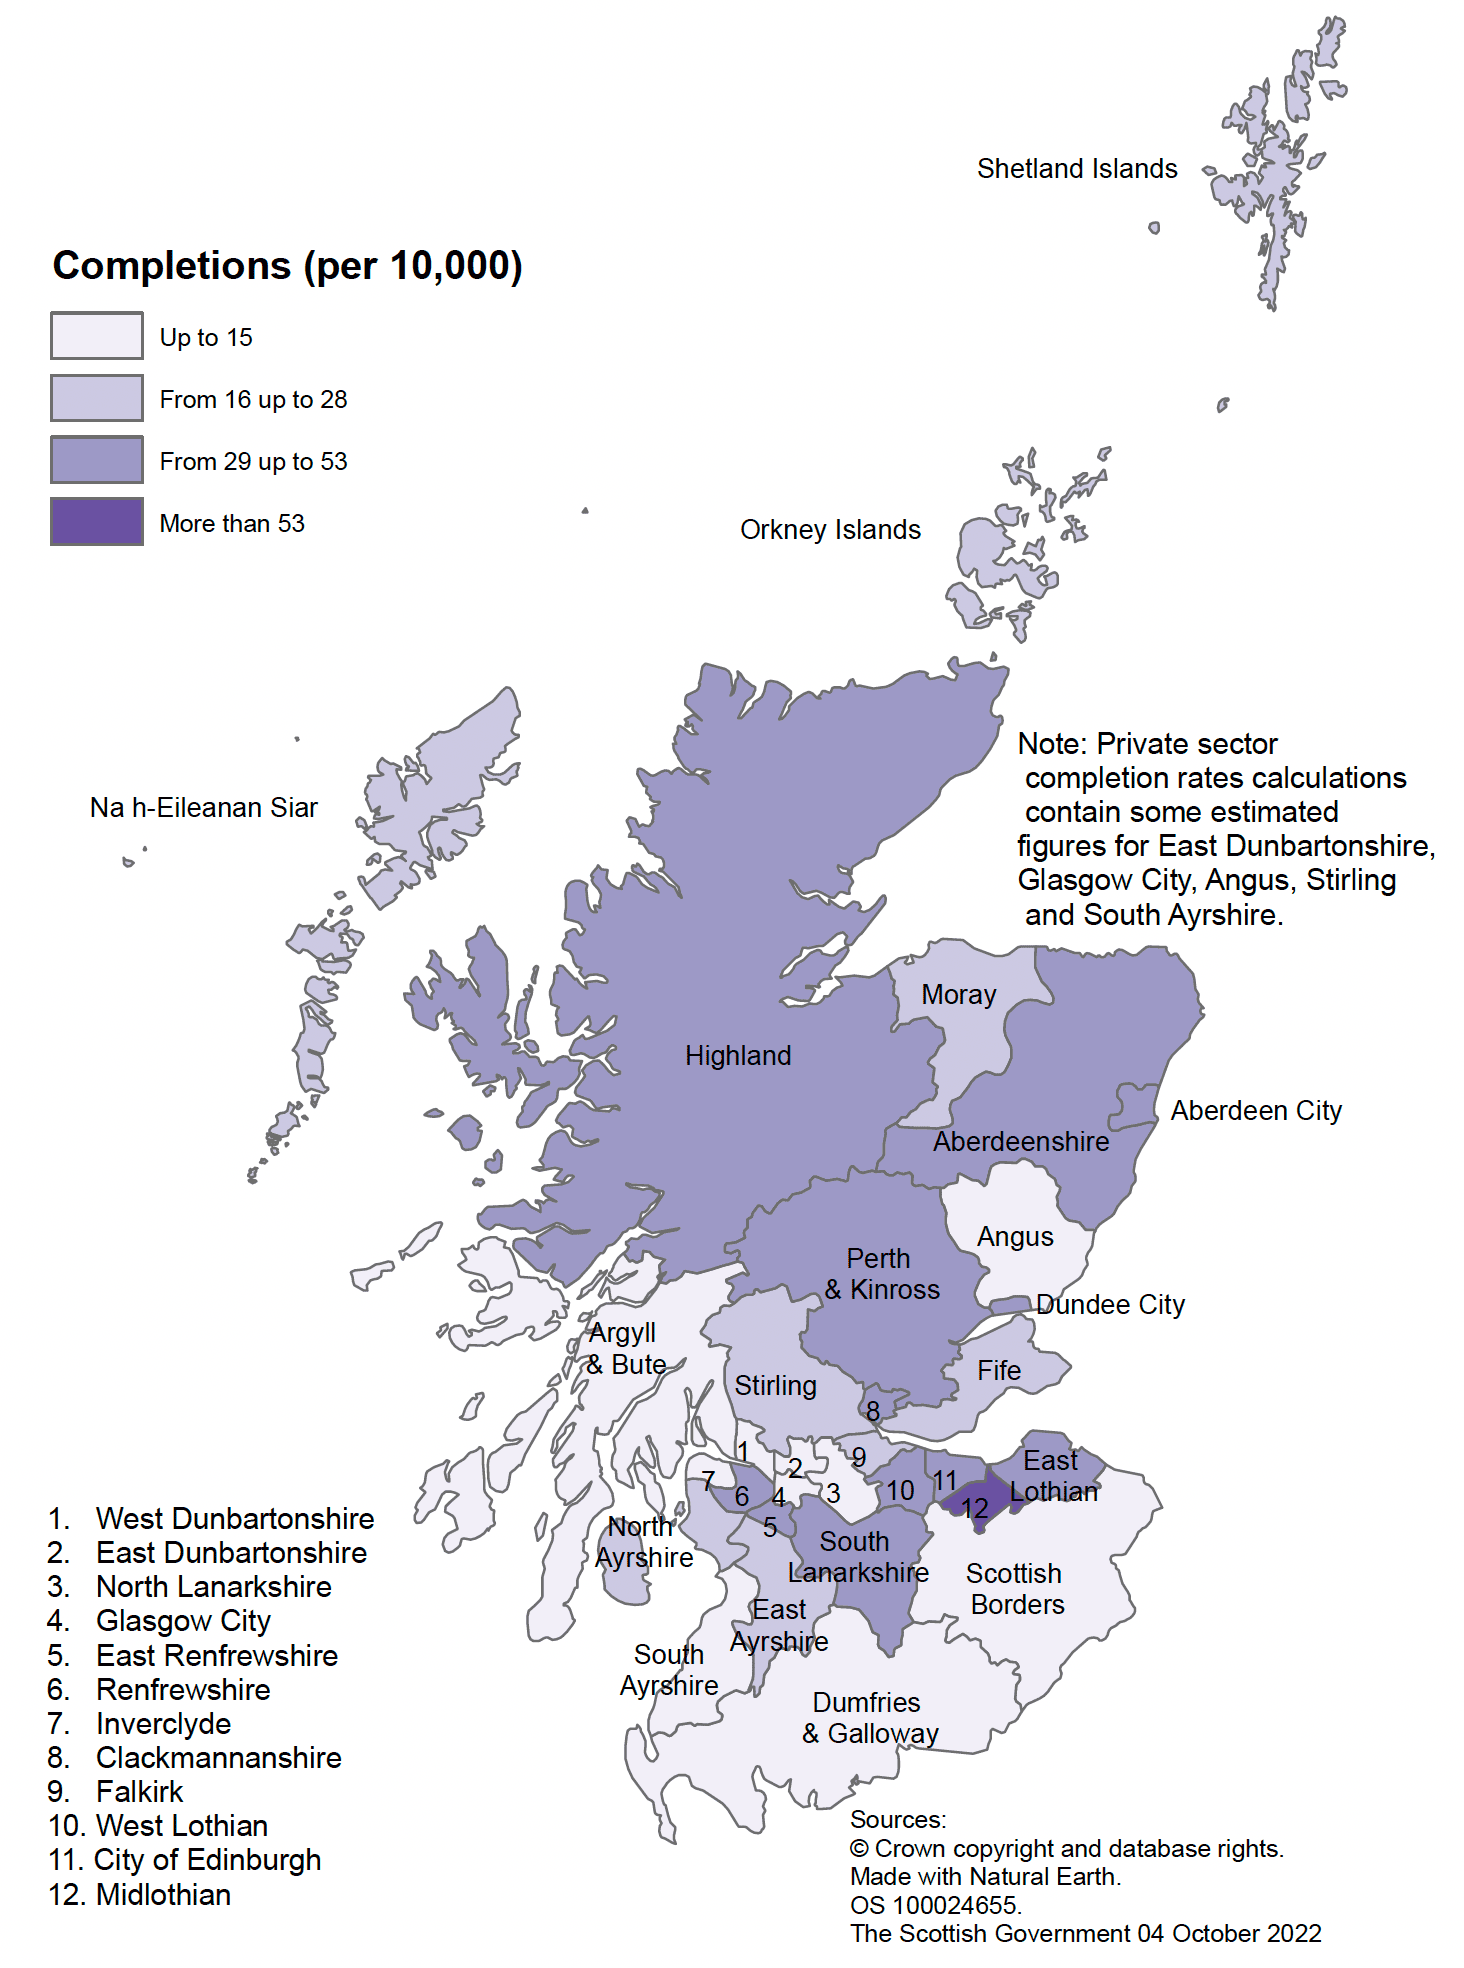 New build housing – A map of local authority areas in Scotland showing private sector completion rates per 10,000 population for year to end March 2022. The highest rate was observed in Midlothian with the lowest rates observed in Glasgow City, West Dunbartonshire, Dumfries & Galloway, Scottish Borders, Inverclyde, East Dunbartonshire, North Lanarkshire, Argyll & Bute, South Ayrshire, and Angus.